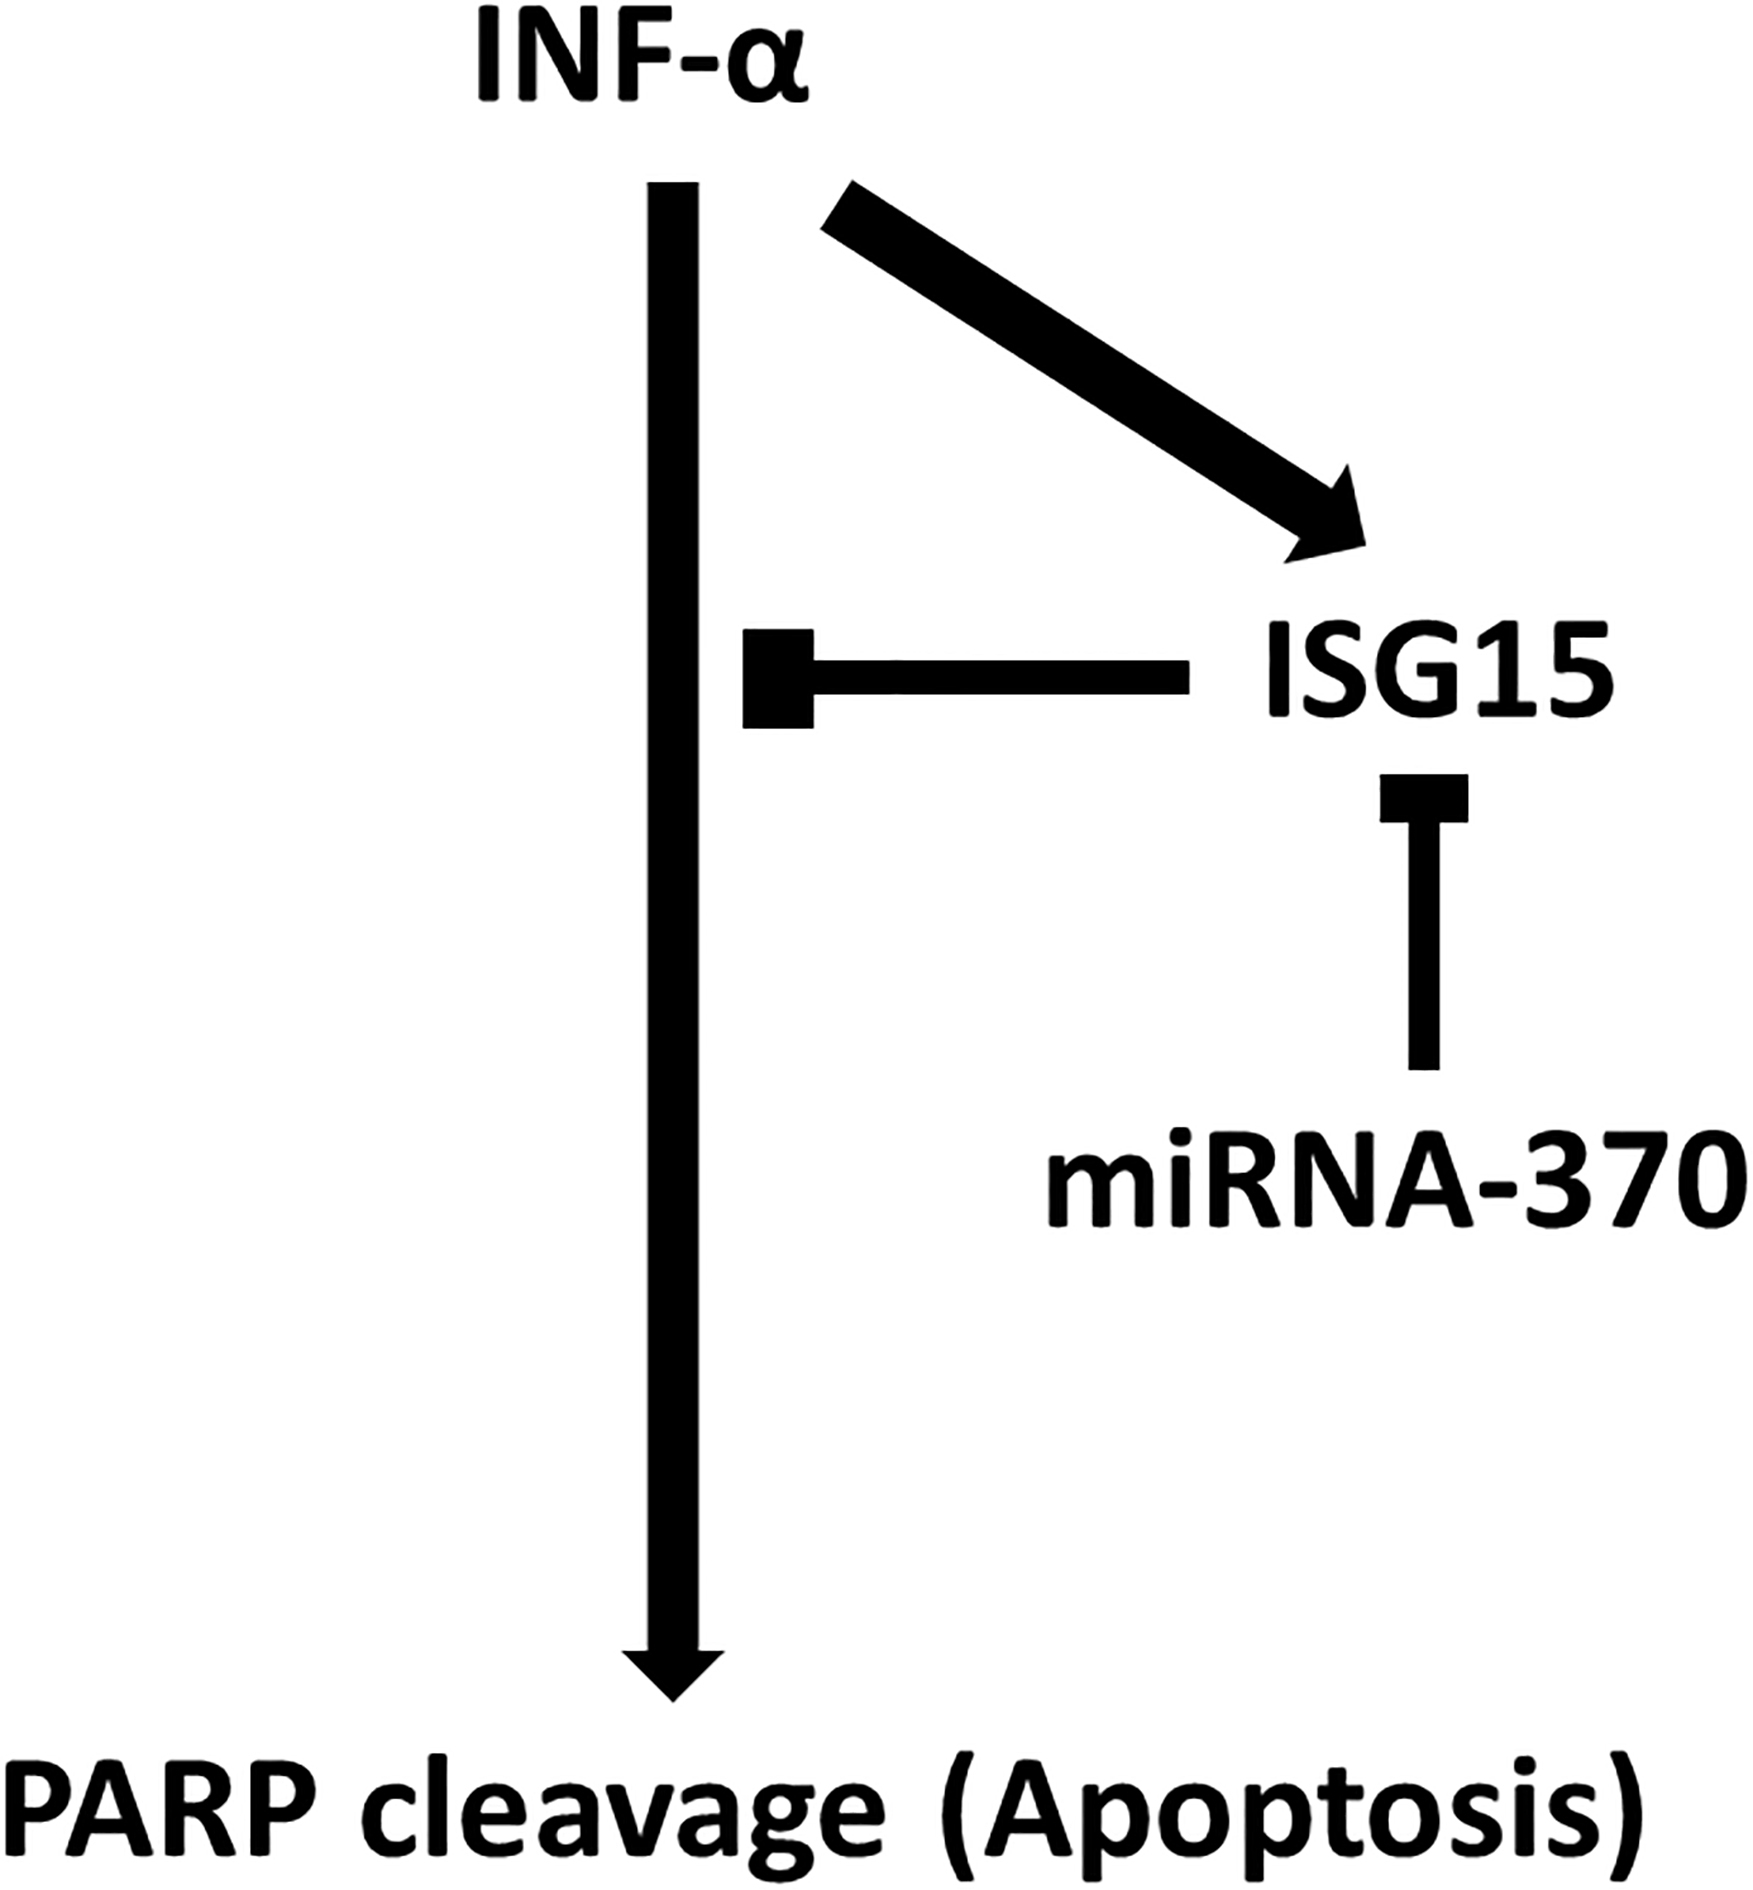 Scheme of the study findings. INF-α induced apoptosis and concomitantly upregulated ISG15, which is a negative regulator of its apoptotic activity. miRNA-370 leads to silencing of ISG15 via a 7-bp sequence in the 3’-UTR and interrupts apoptosis downregulation.